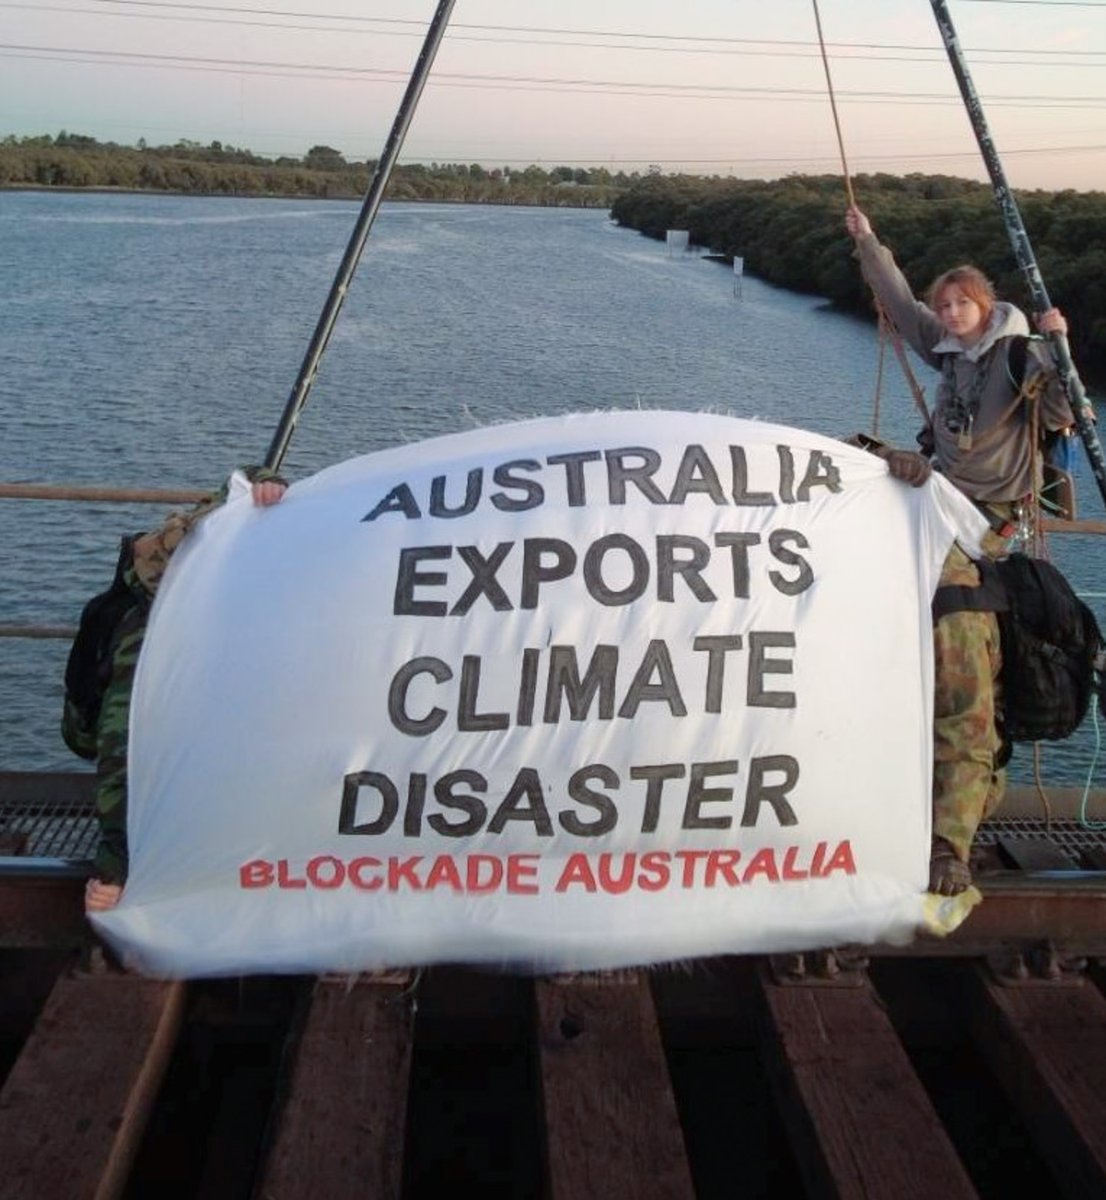 Shameful - Australia continues to jail peaceful climate protesters Max, Andy & Darsh from @BlockadeAus were all refused bail by a Brisbane court this week & are being held in custody until July 17 #ProtectProtest @hrw